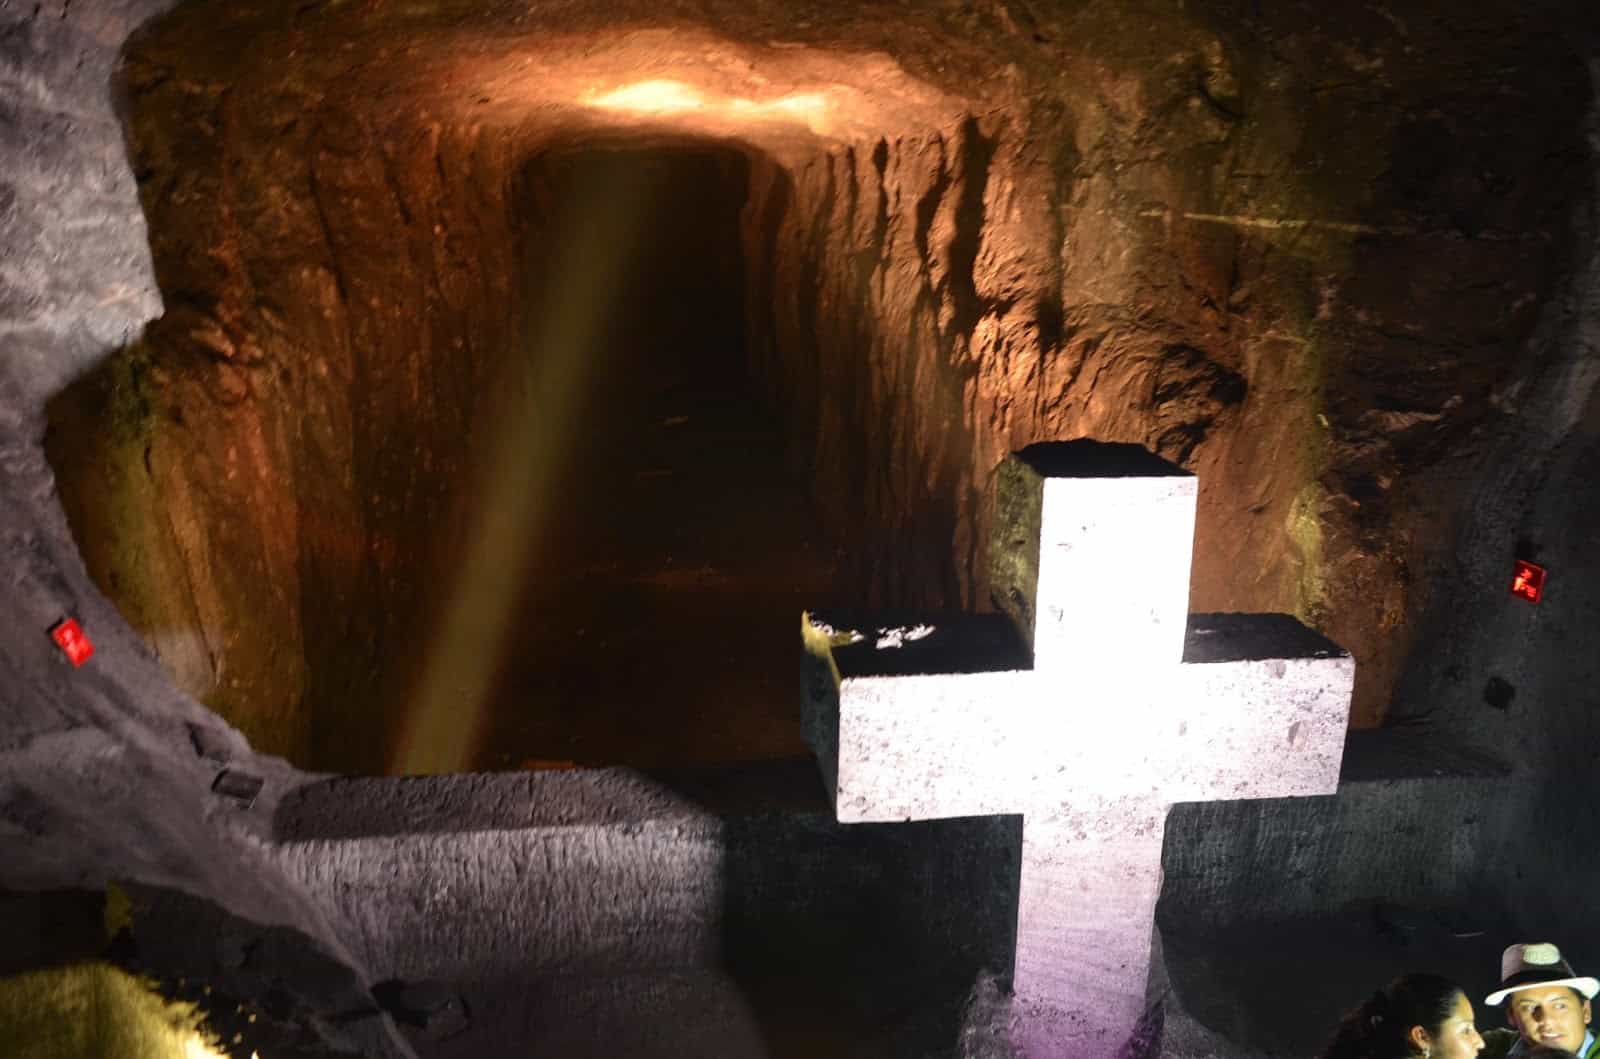 Salt Cathedral in Zipaquirá, Cundinamarca, Colombia